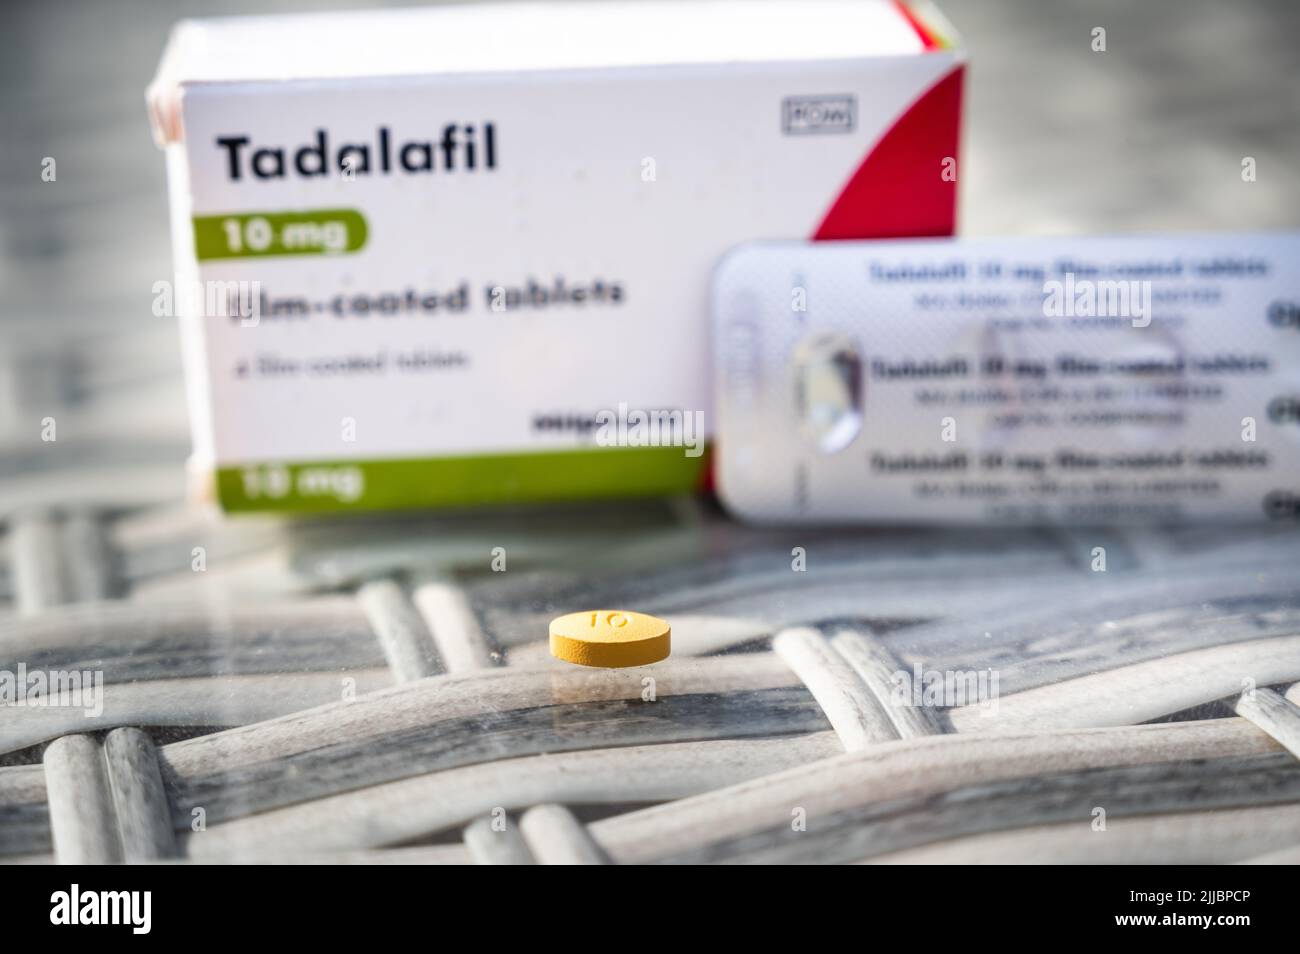 Tadalafil , otherwise known as Cialis, a drug used to treat erectile dysfunction Stock Photo